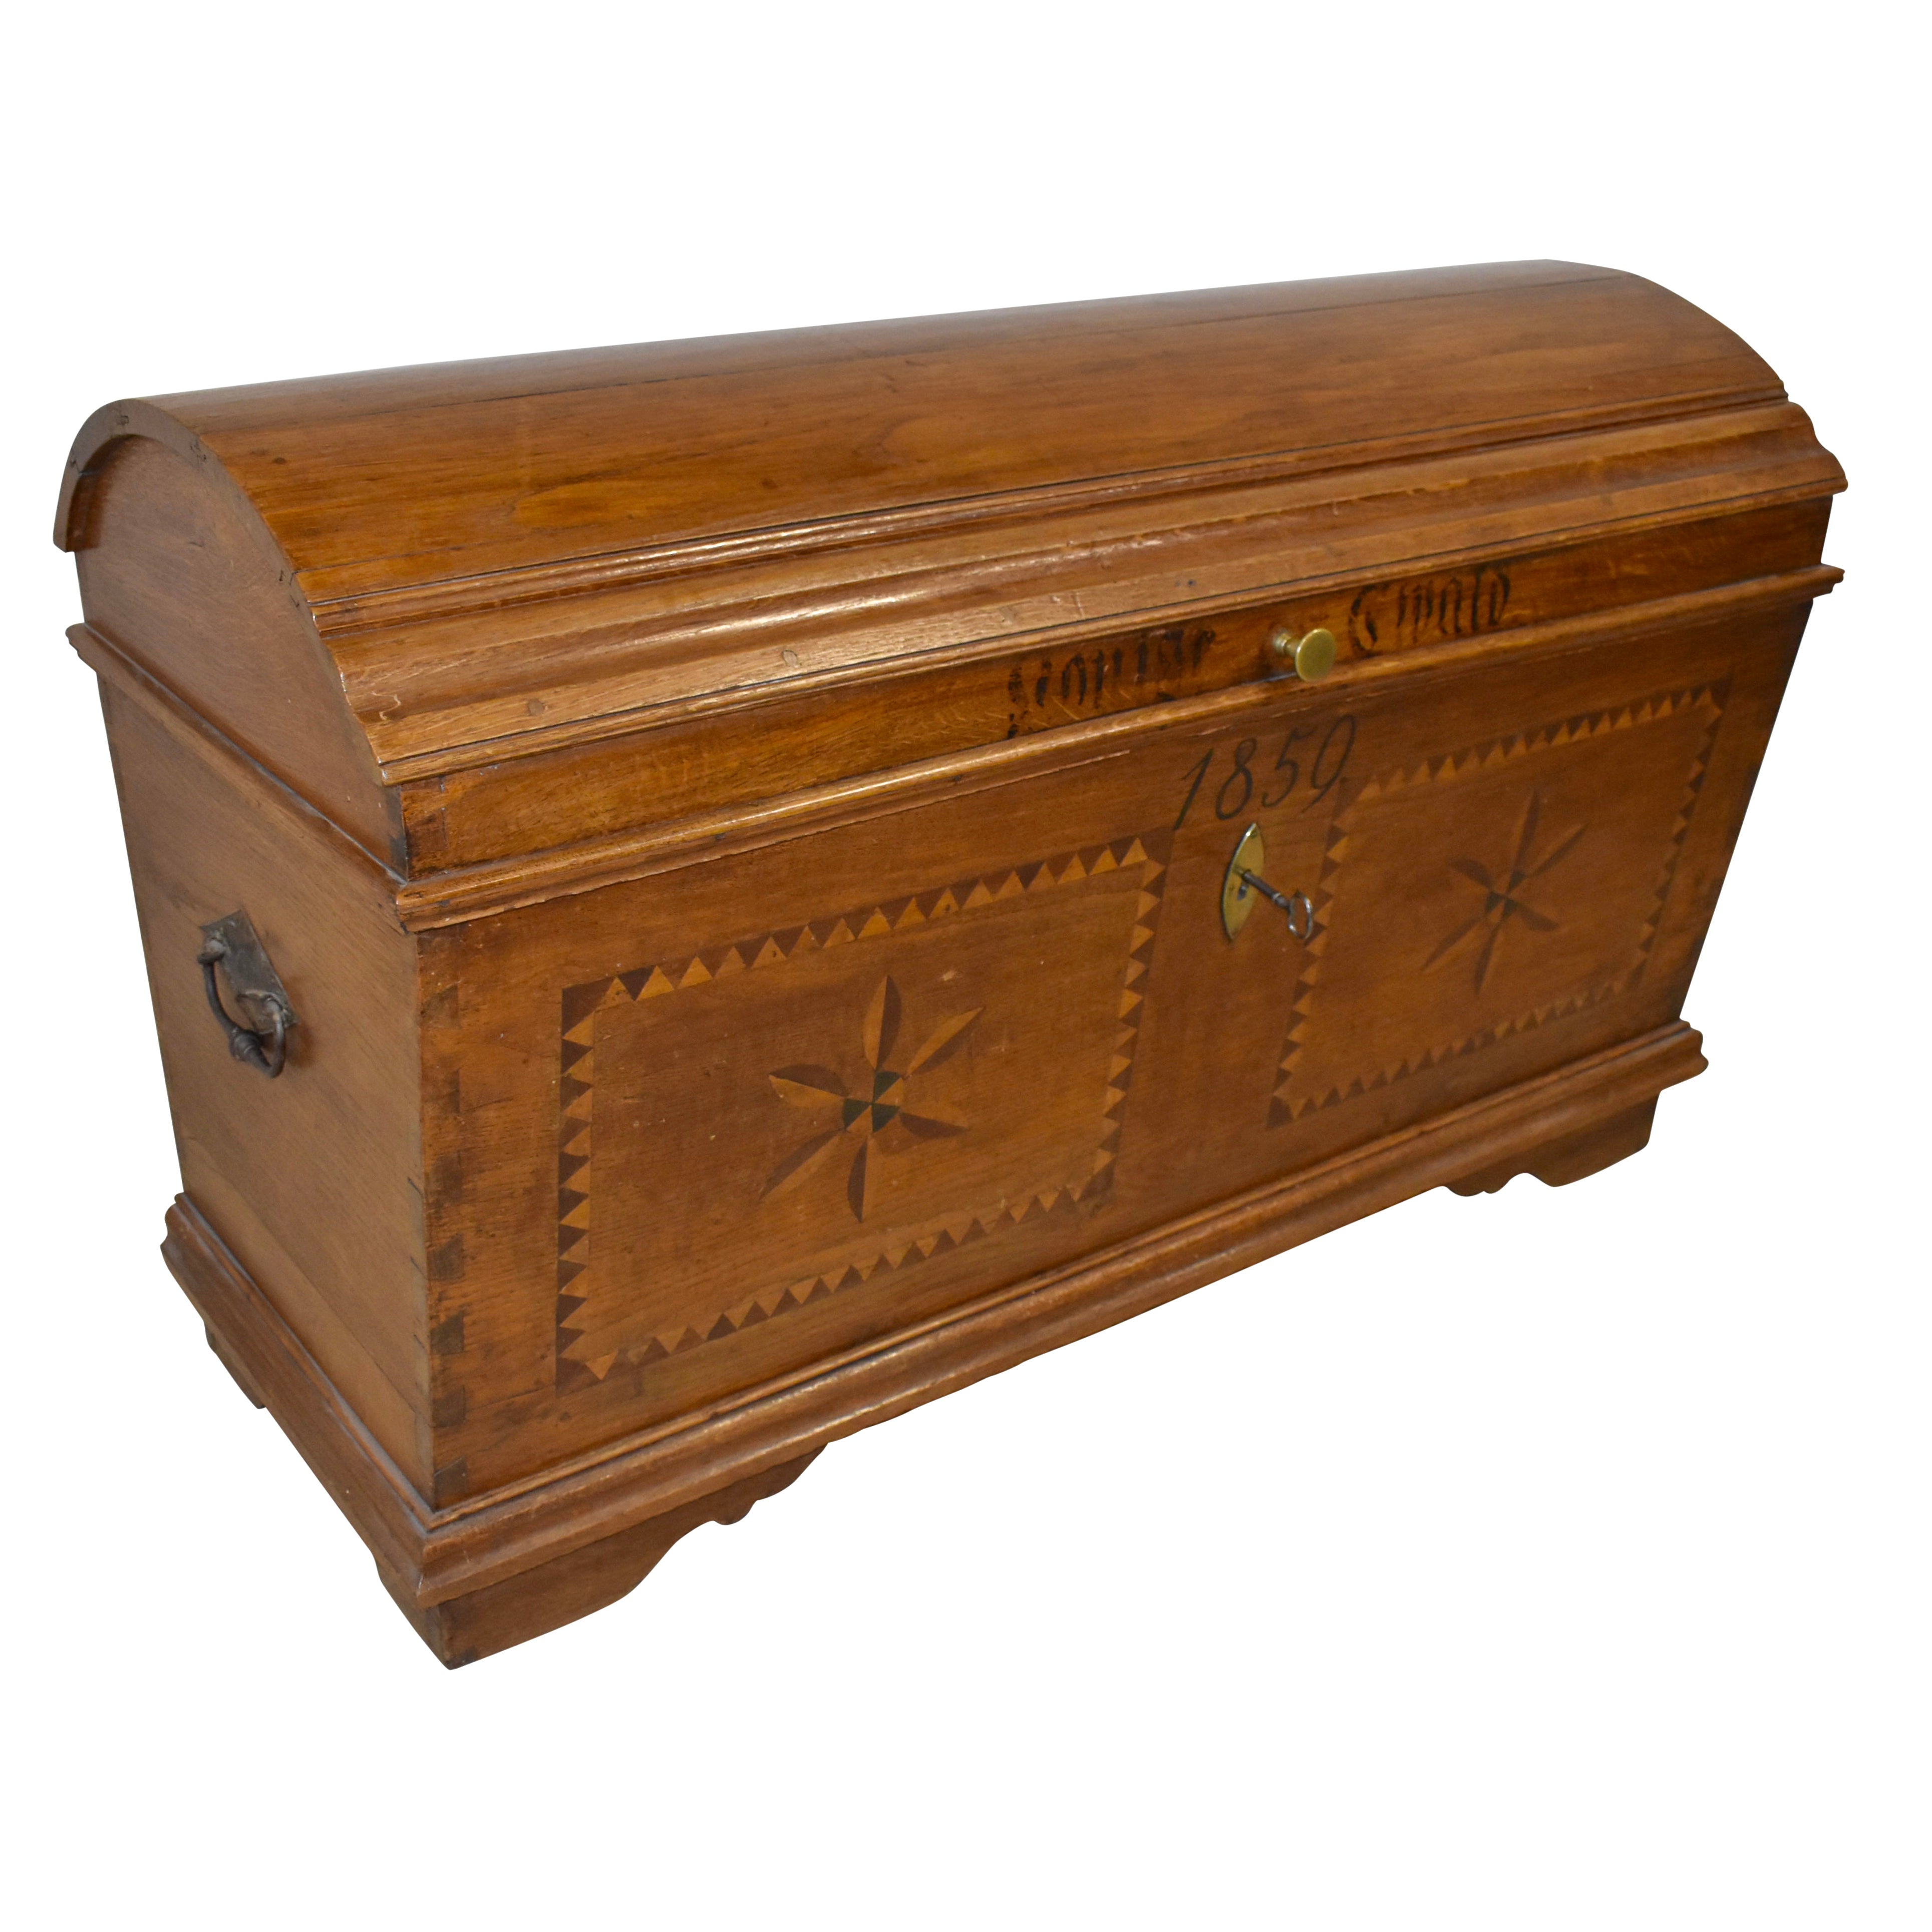 Oak Dome-Top Trunk with Inlays